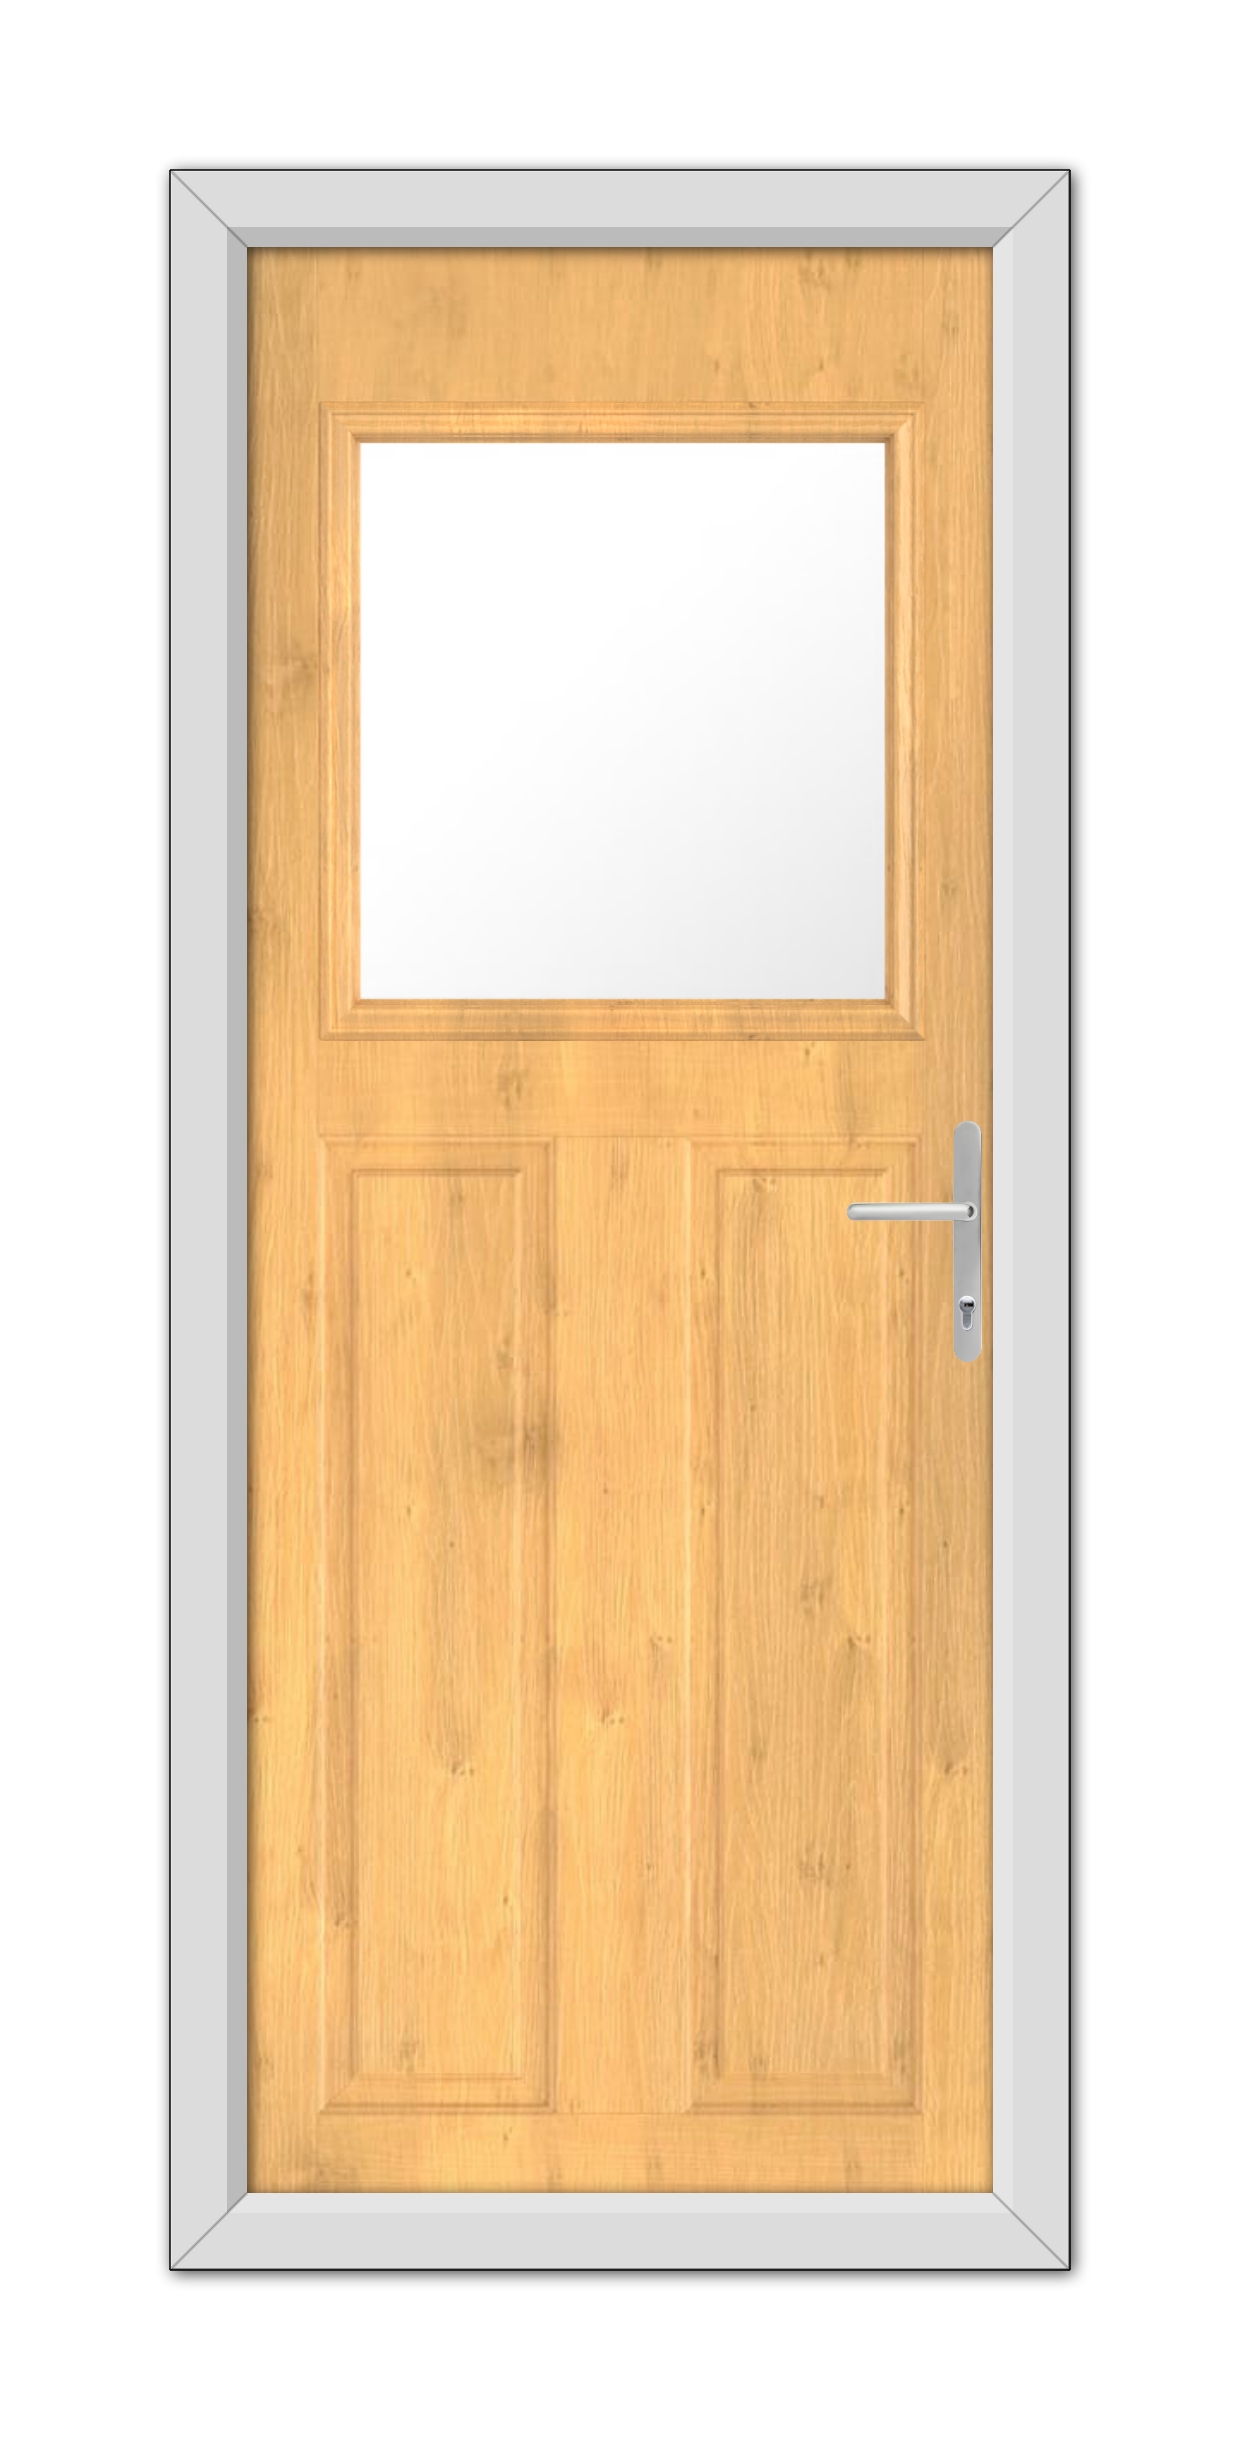 Irish Oak Axwell Composite Door 48mm Timber Core with a small square window at the top and a metal handle, set within a gray frame, isolated on a white background.